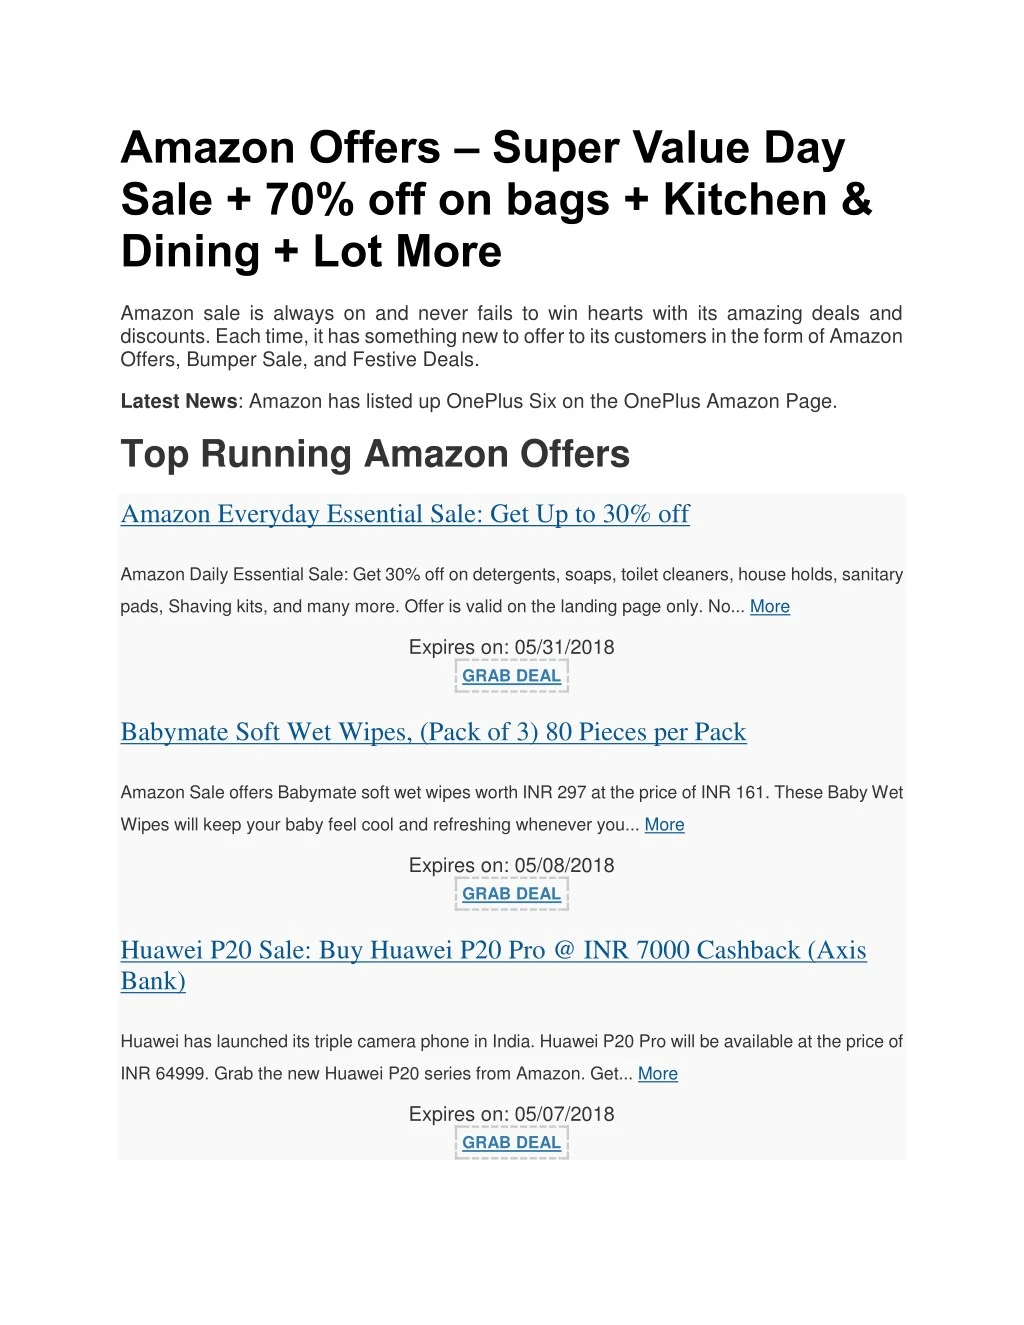 amazon offers super value day sale 70 off on bags